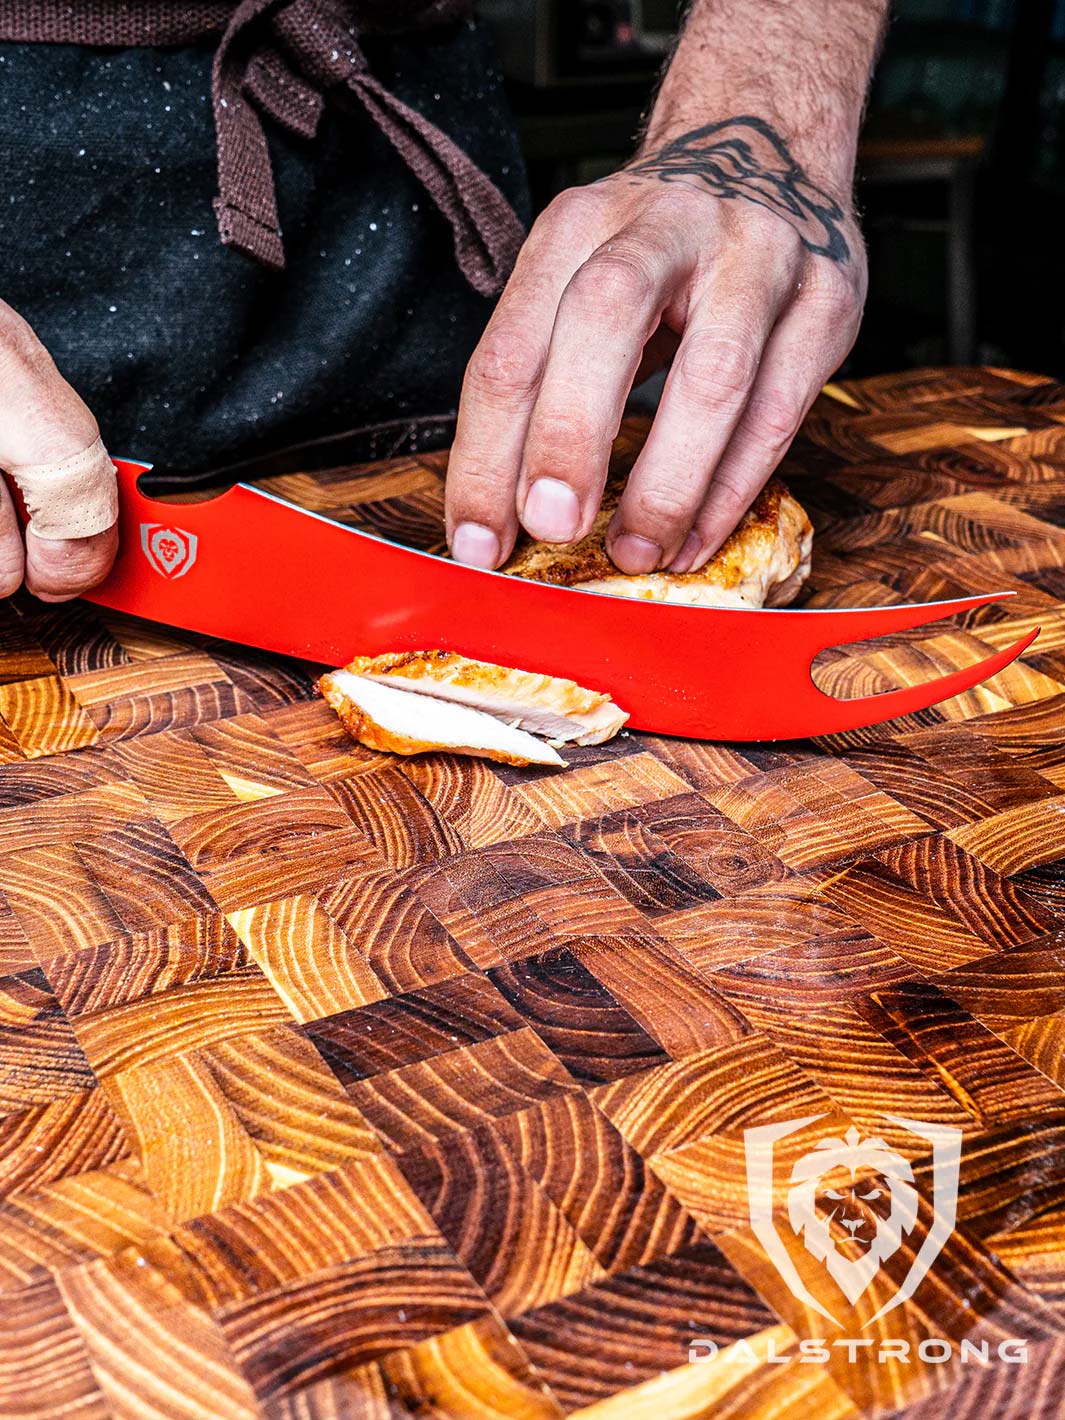 Dalstrong shadow black series 9 inch pitmaster knife red edition with a sliced chicken on a cutting board.